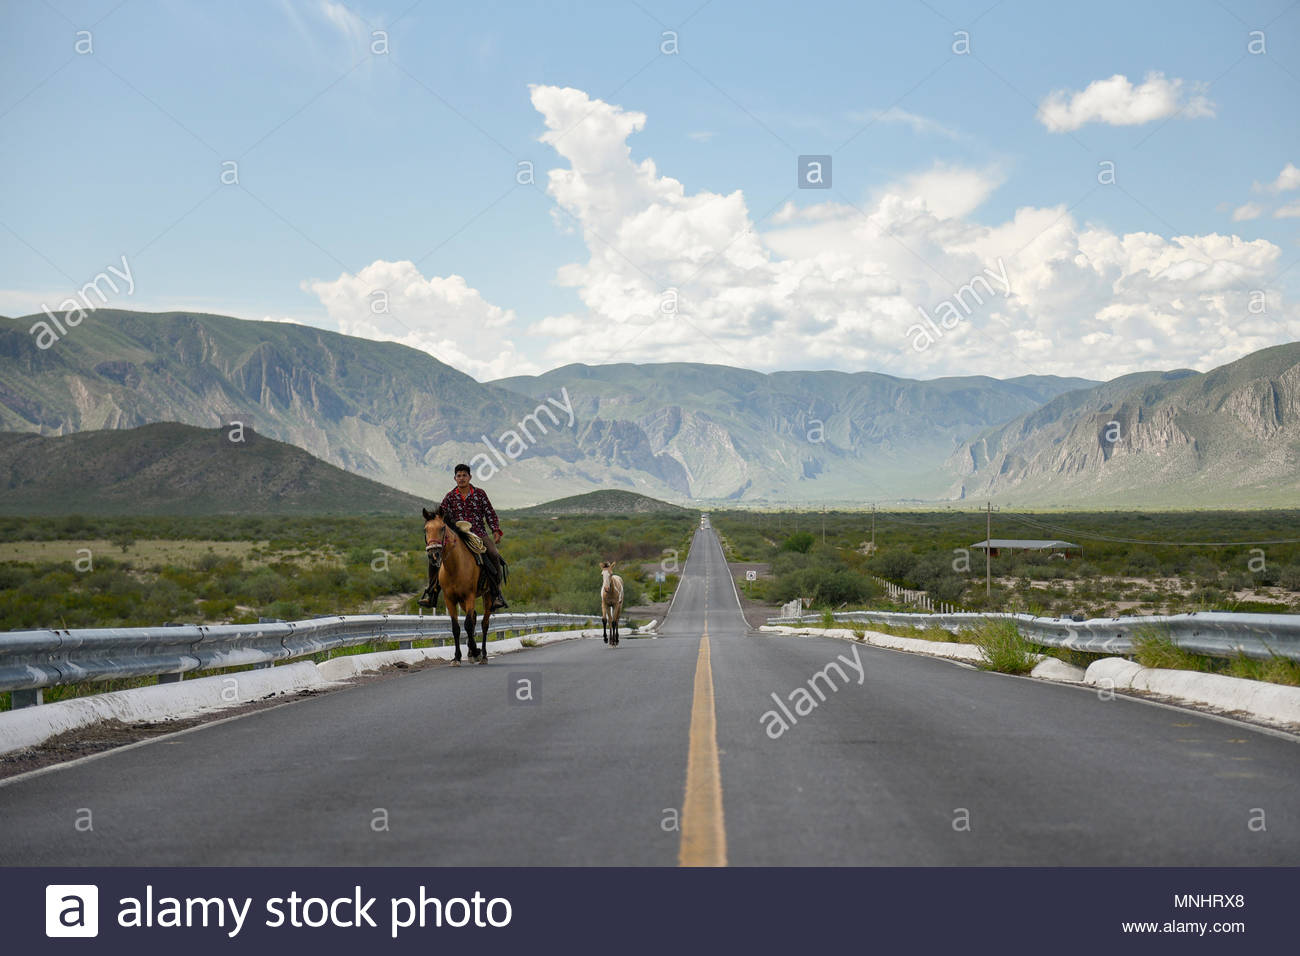 Front Of Man Riding Horse Along Road With Mountains In